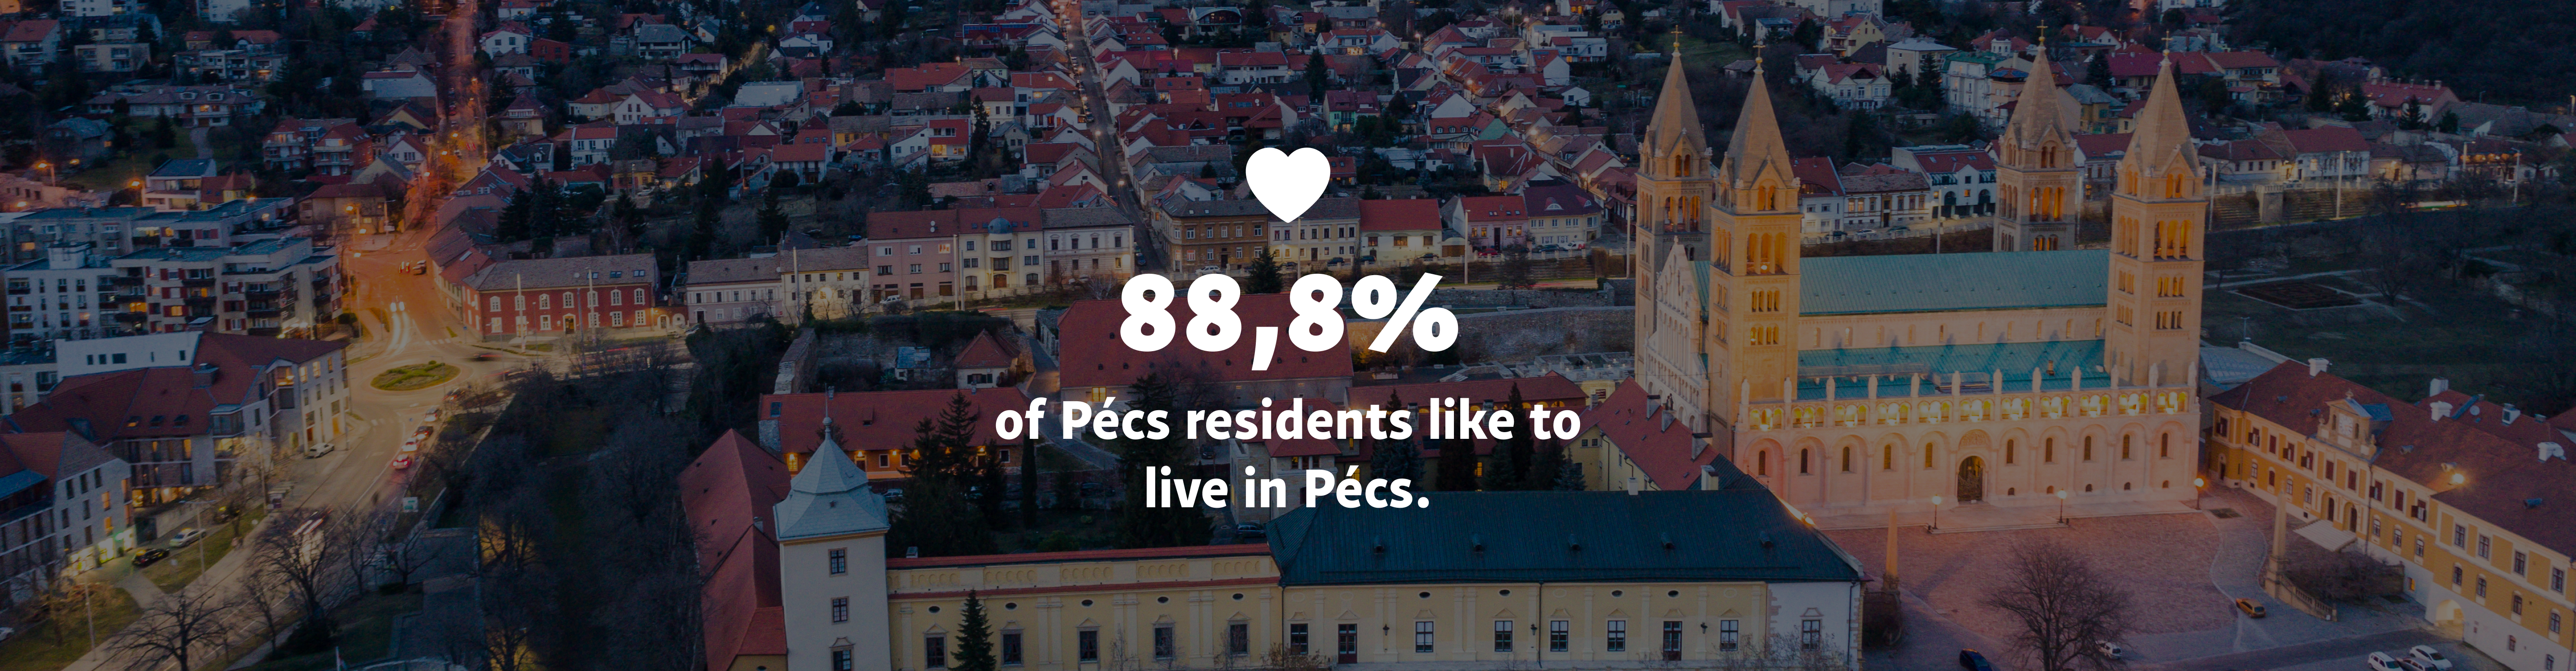 88% of Pécs residents like to live in Pécs.